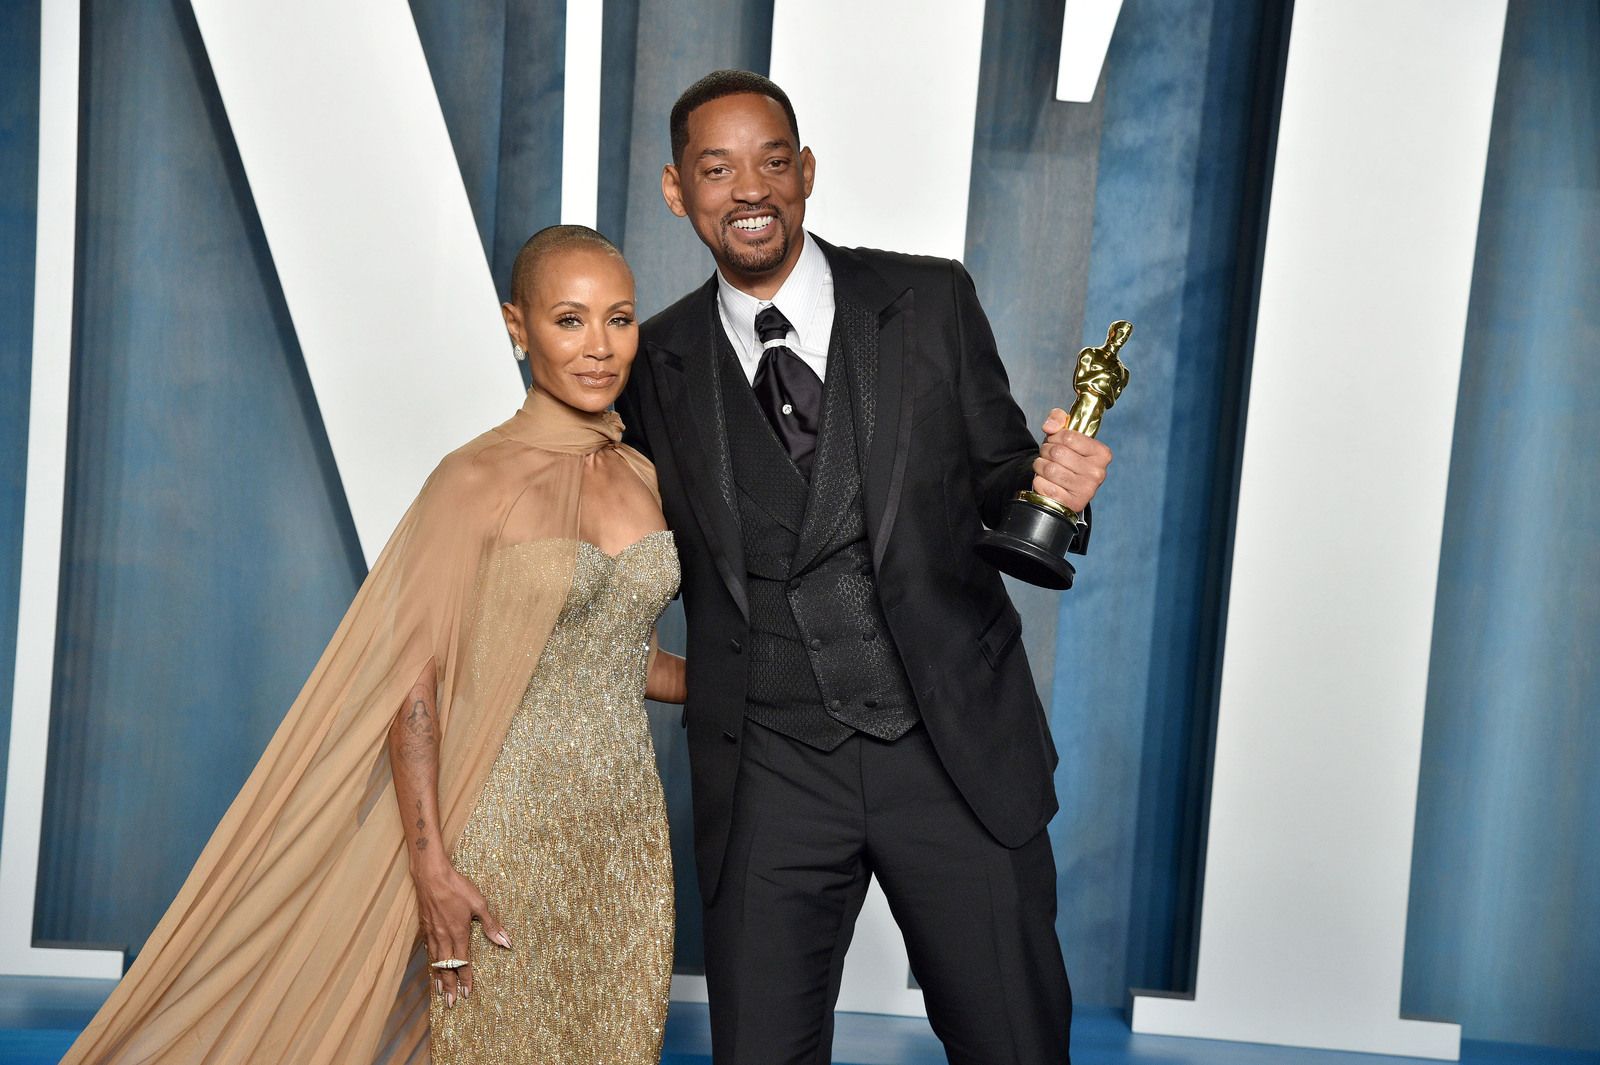 S10 Ep164: 04/21/22 - Jada Pinkett-Smith’s ‘Red Table Talk’ Barely Mentions Will Smith’s Oscars Slap—Says They Will Unpack It When ‘The Time Calls’